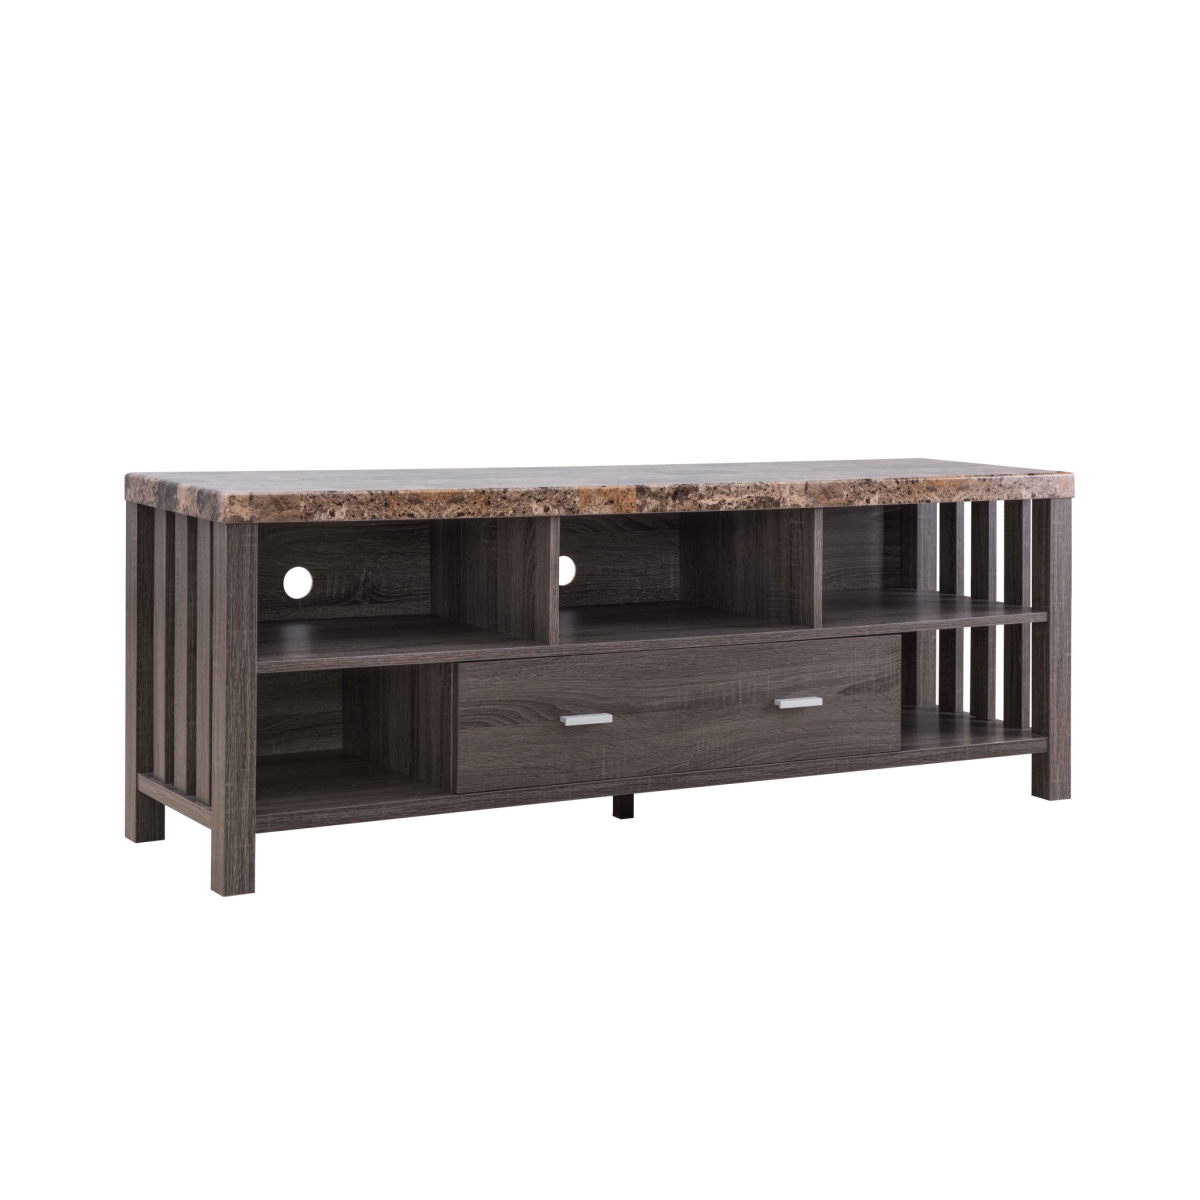 HomeRoots 482789 21.5 x 60 x 15.5 in. Dark Gray Faux Marble & Manufactured Wood Cabinet Enclosed Storage TV Stand